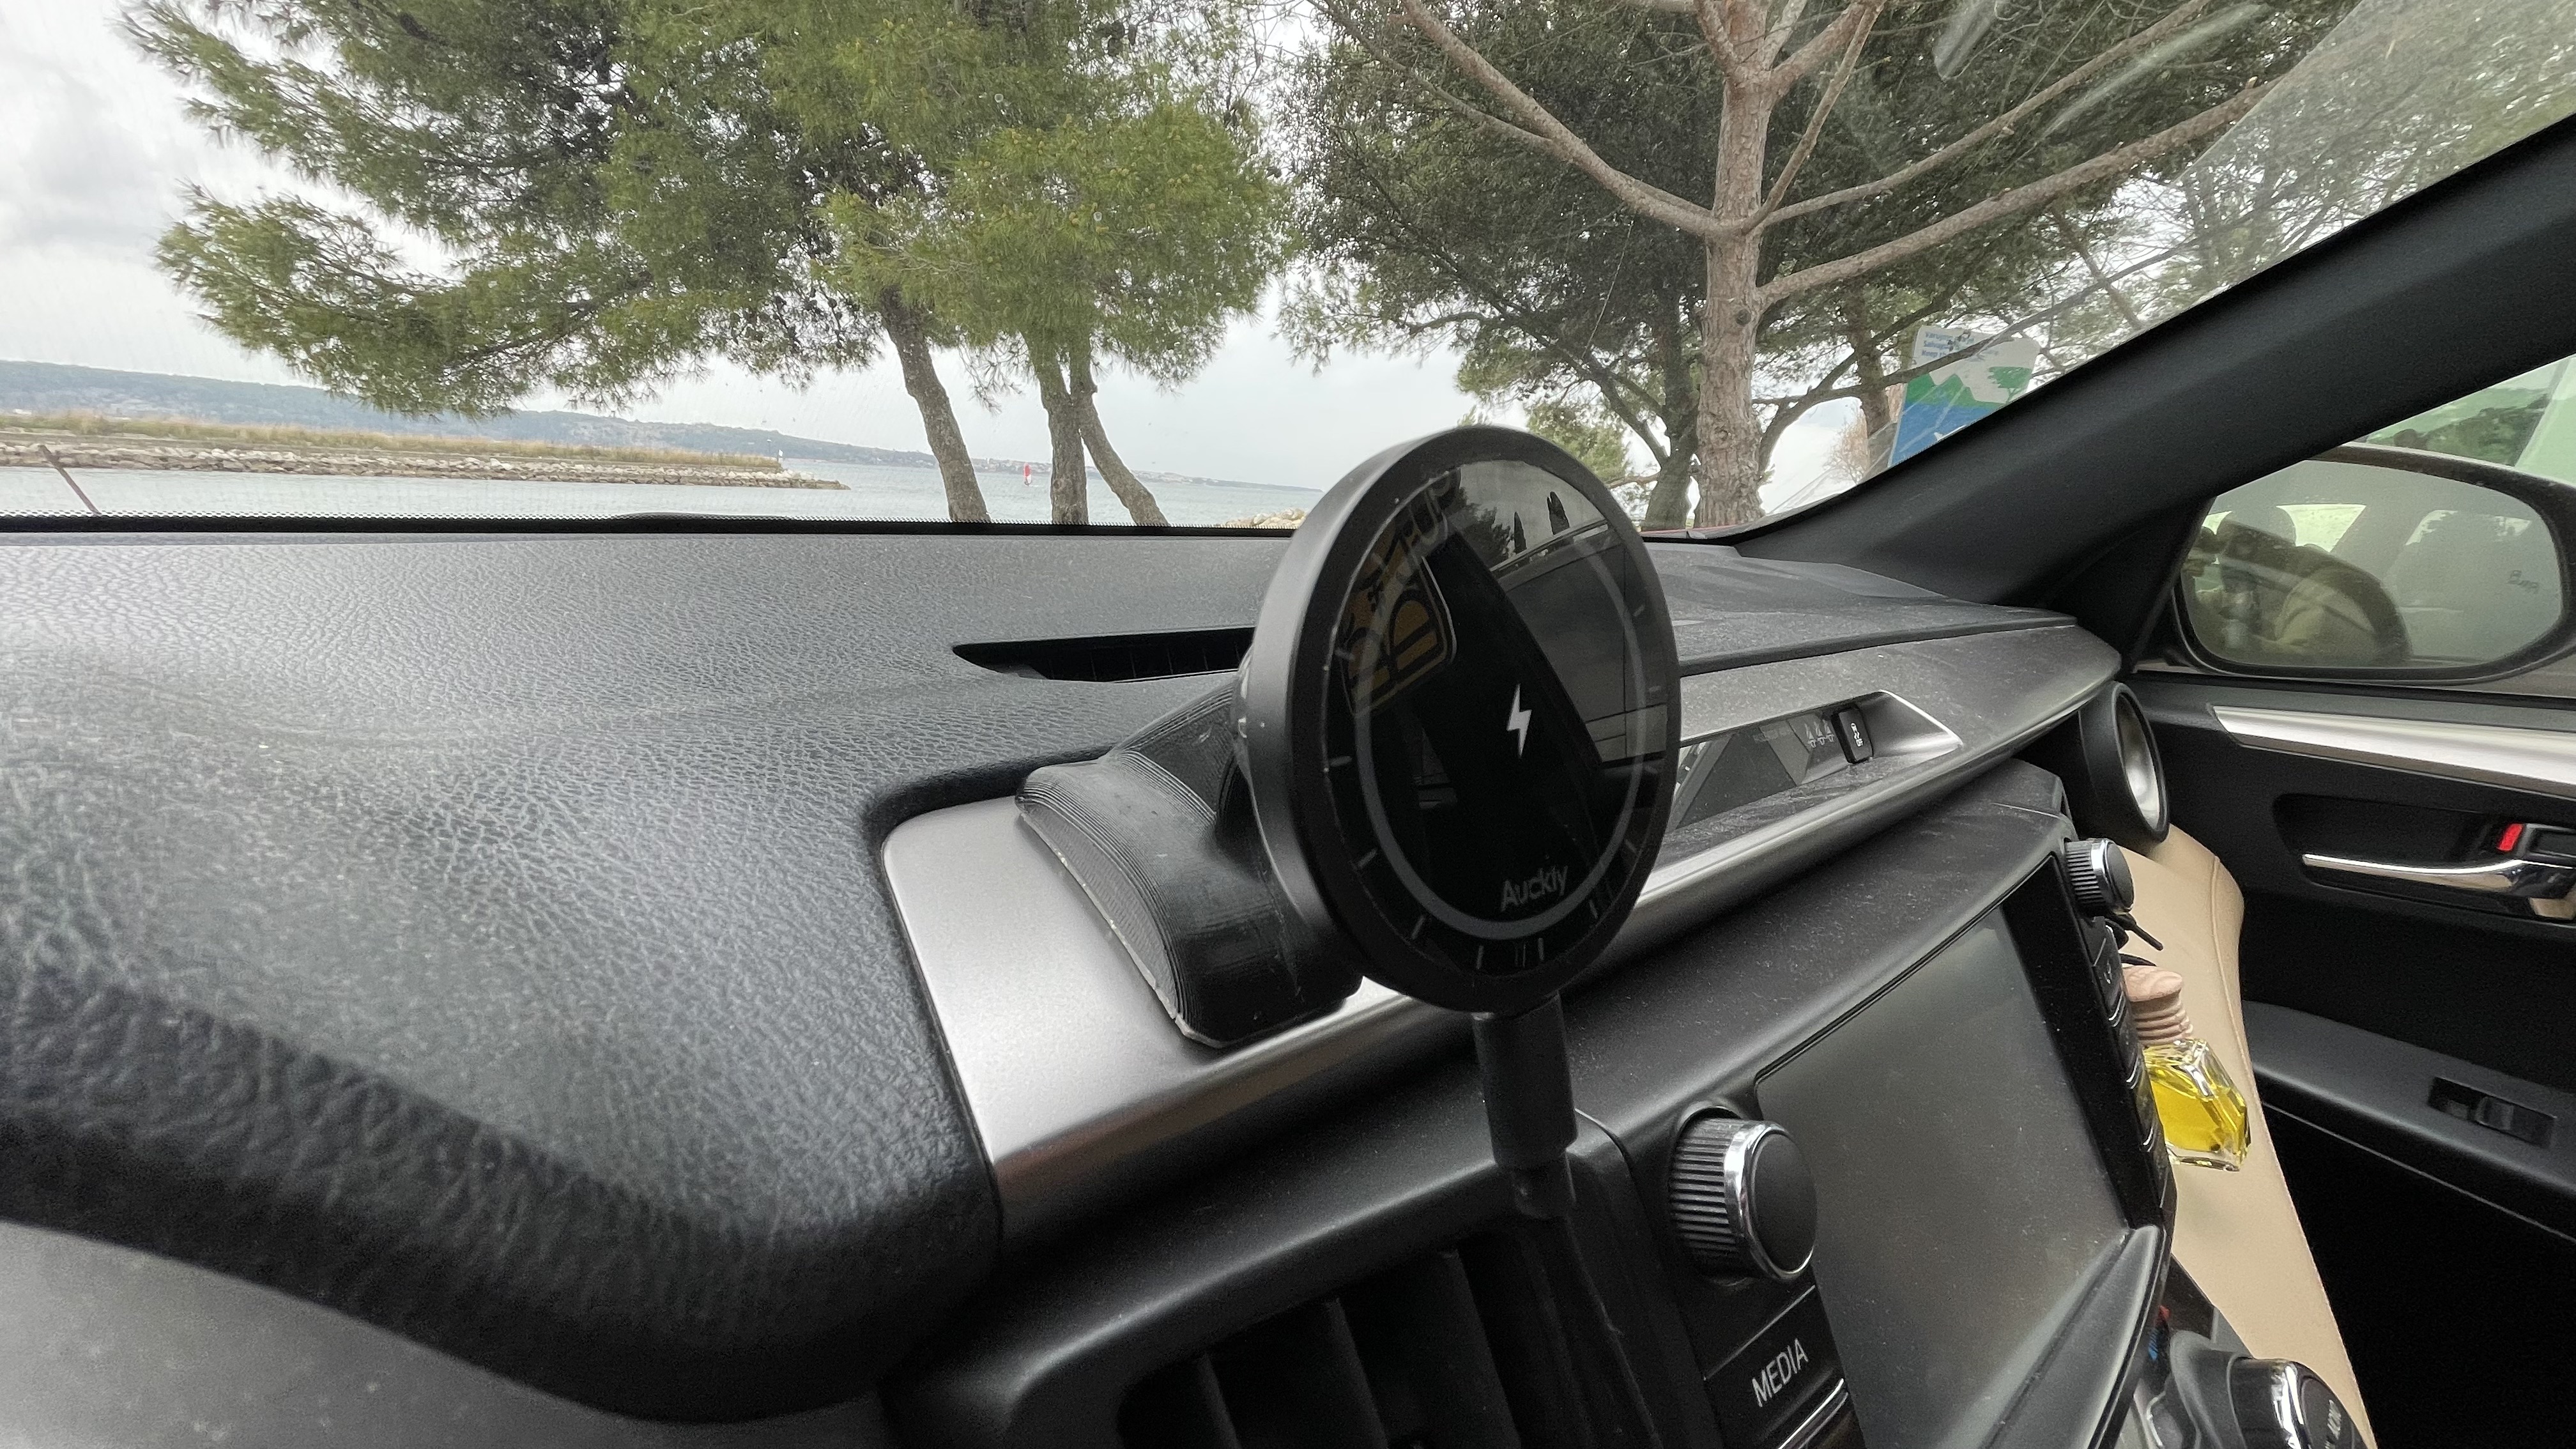 iPhone MagSafe car holder/charger